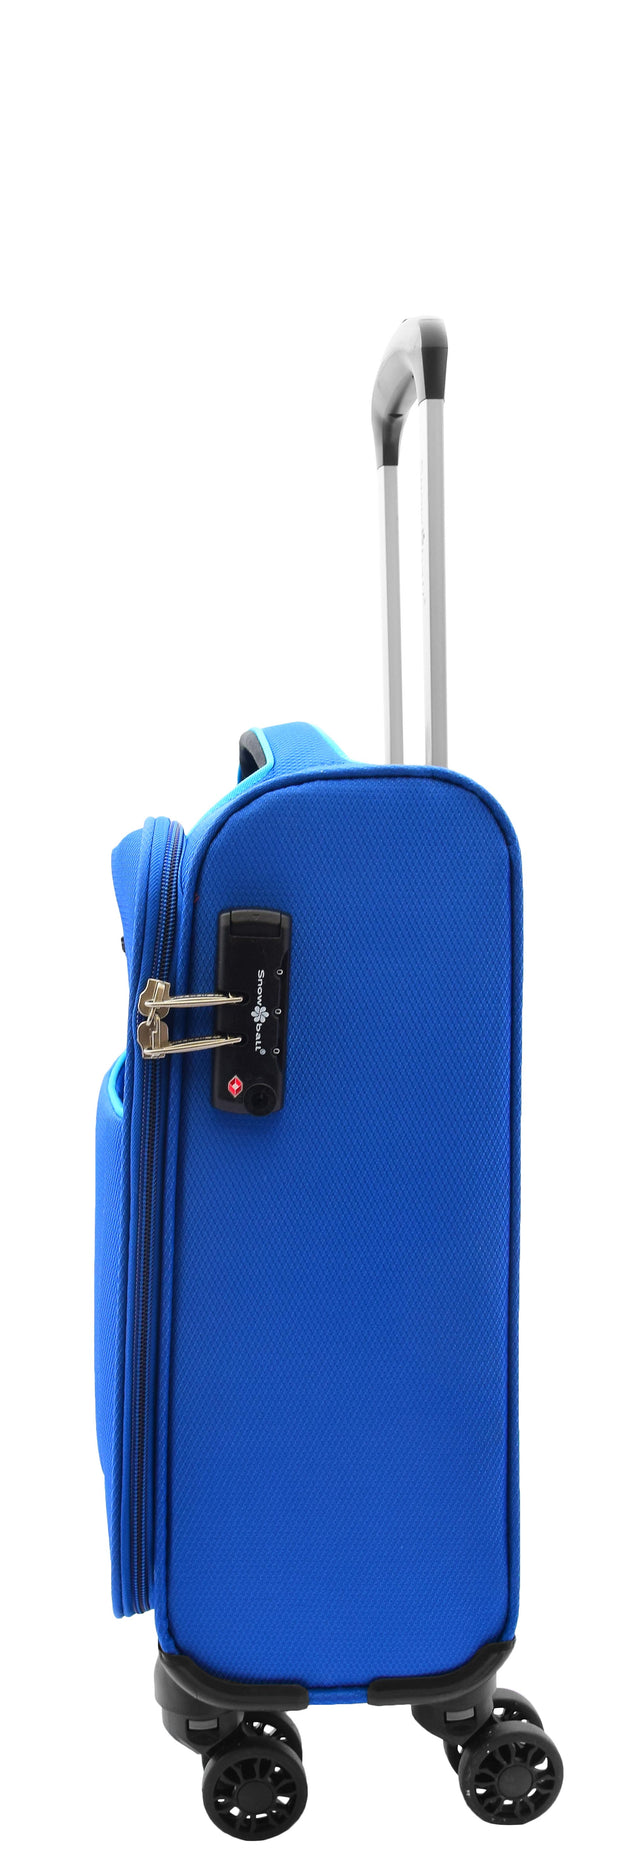 Under Seat Suitcase Budget Airline Approved Cabin size 4 Wheel Hand Luggage M1 Blue